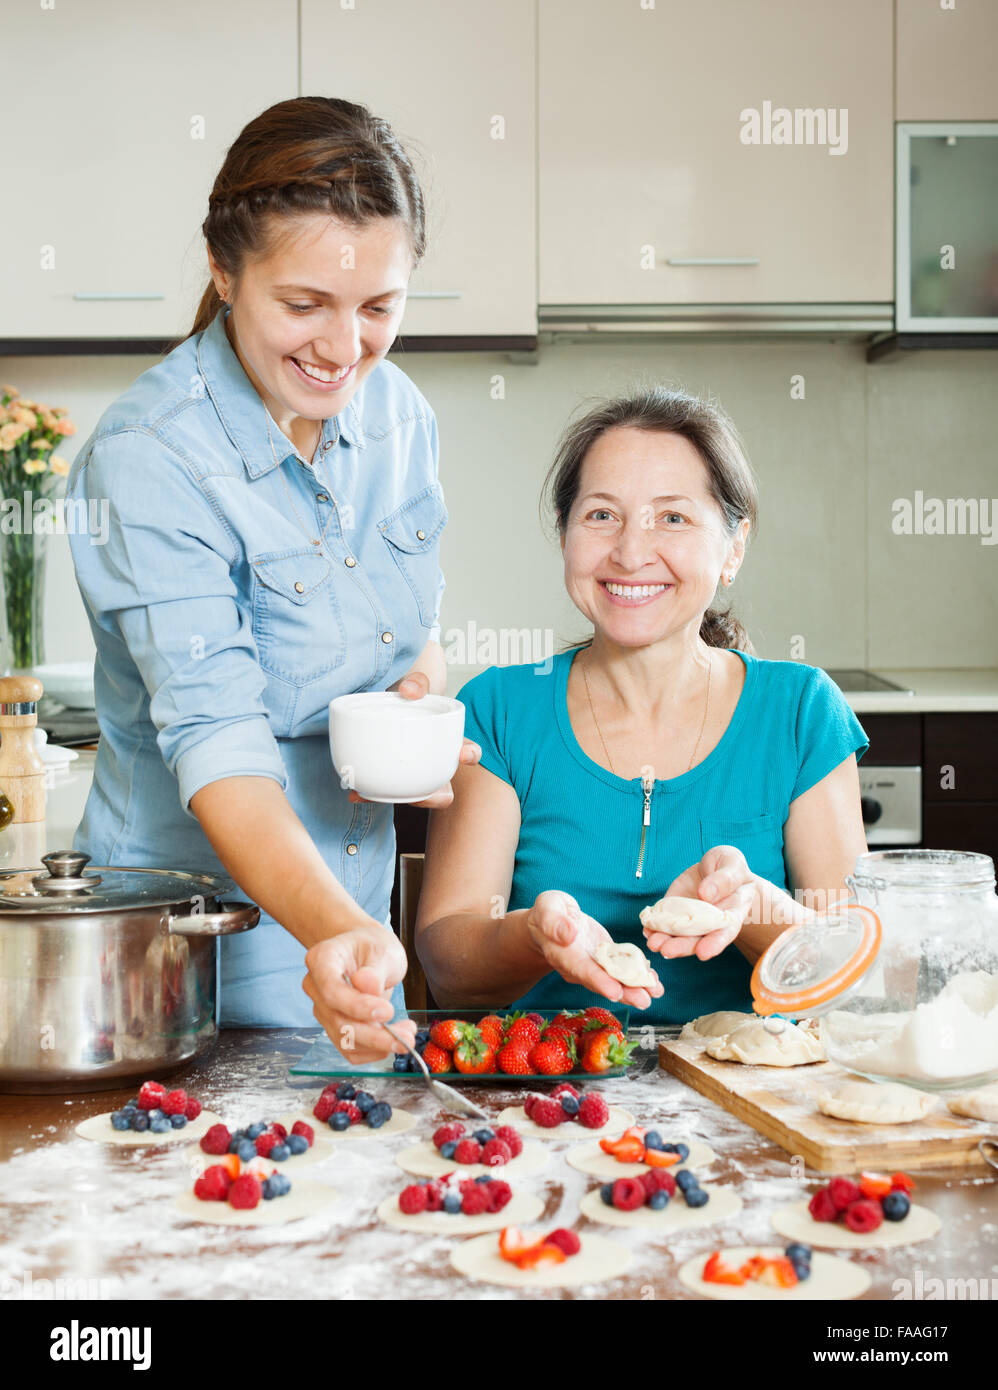 Adult daughter with mature  mother making perogies with berries Stock Photo